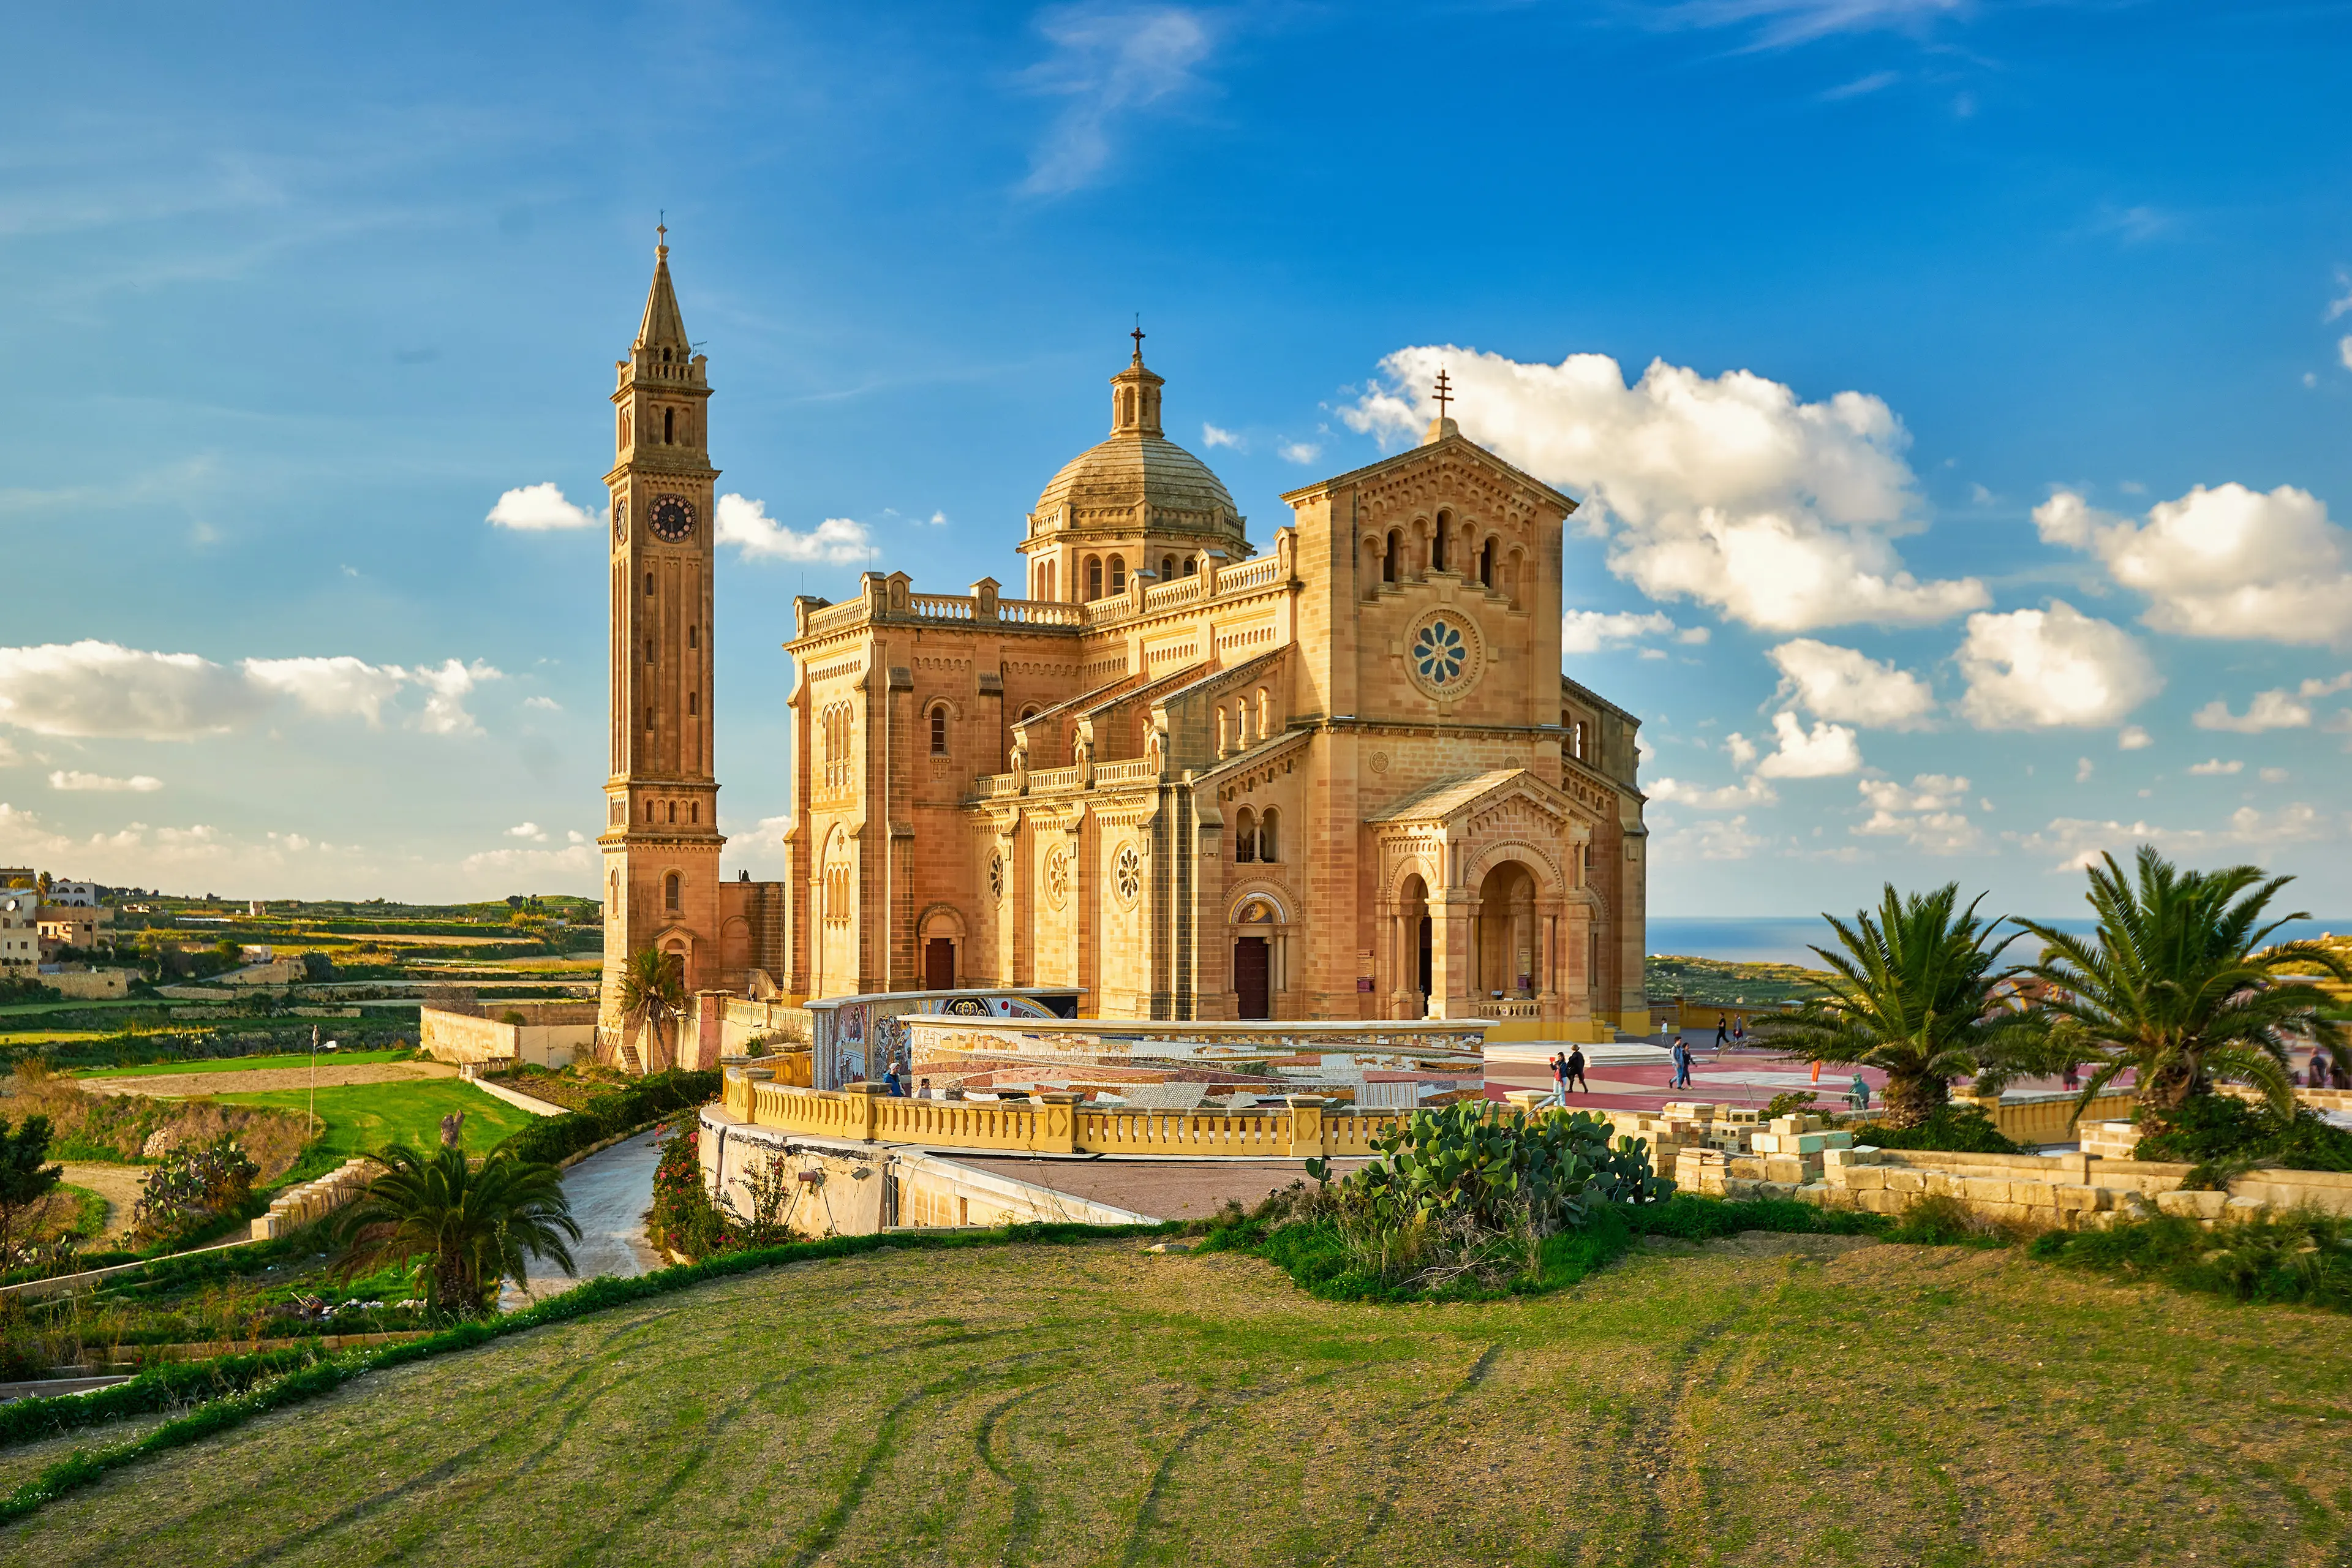 3-Day Family Relaxation & Sightseeing Tour in Malta